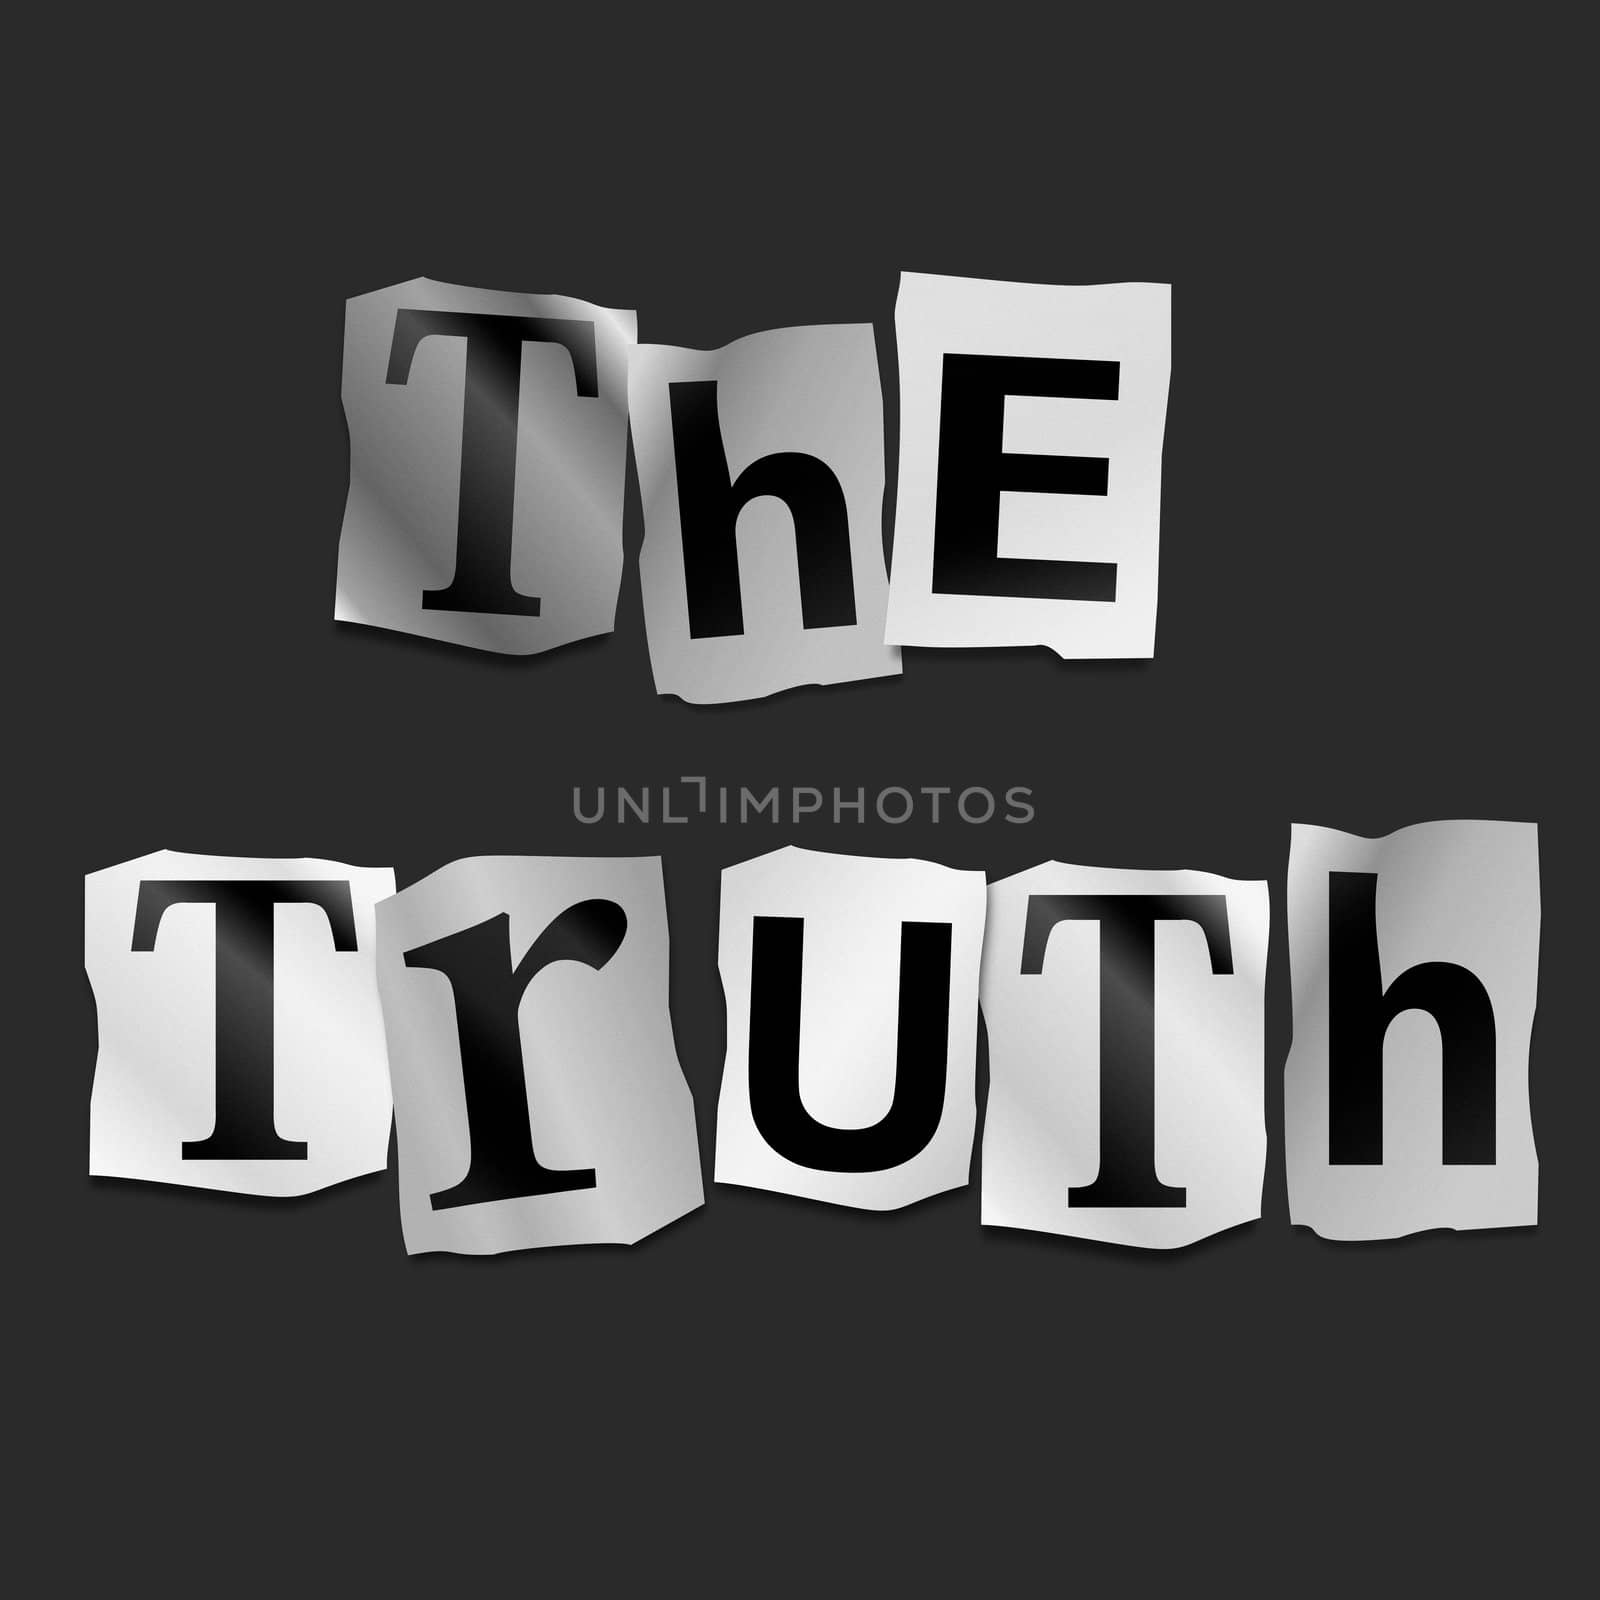 Illustration depicting cutout printed letters arranged to form the words the truth.